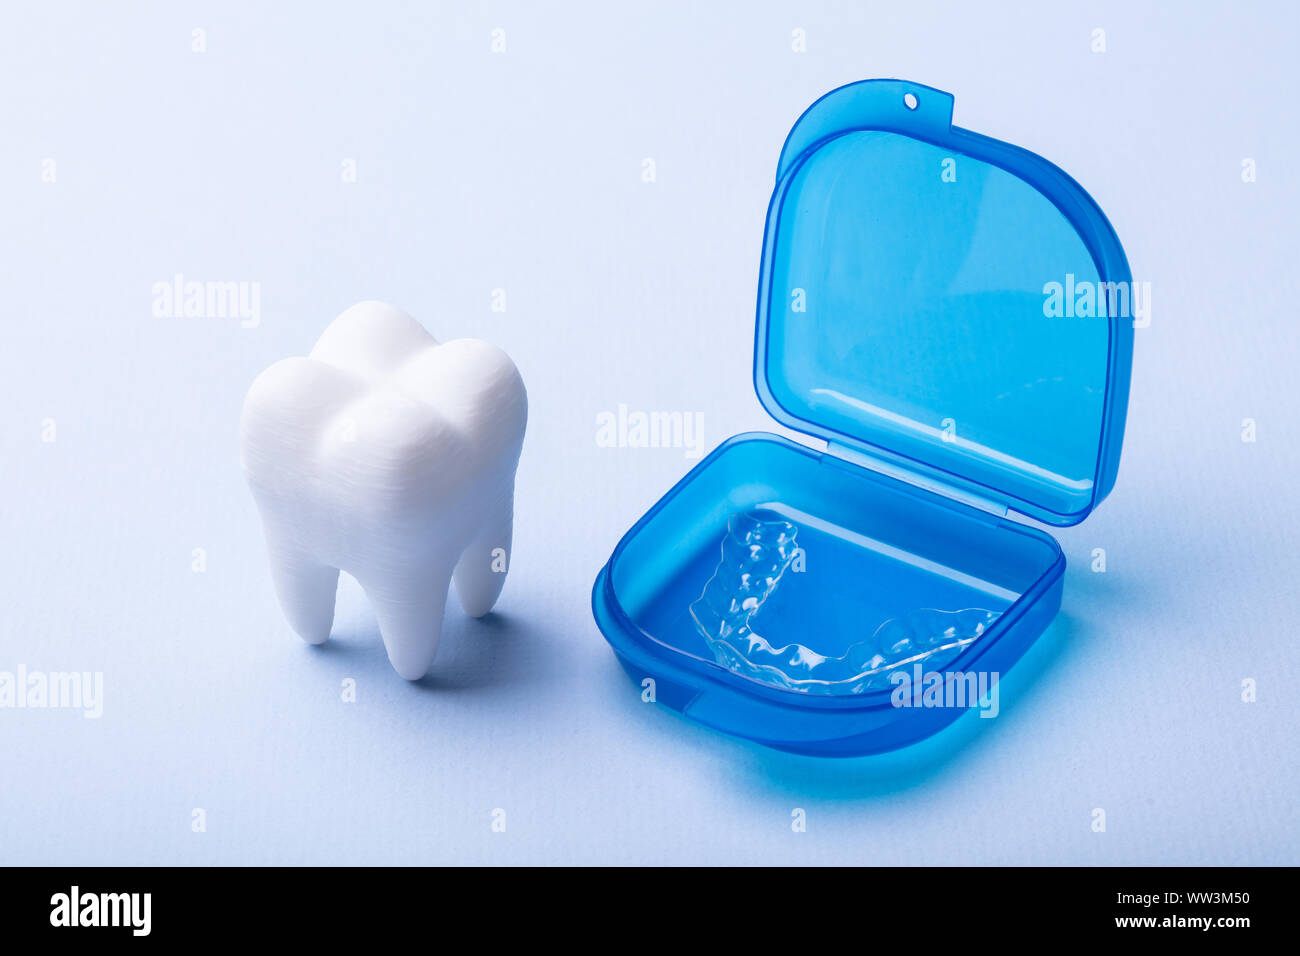 White Dental Model And Transparent Mouth Guard In Case Over Blue Surface Stock Photo